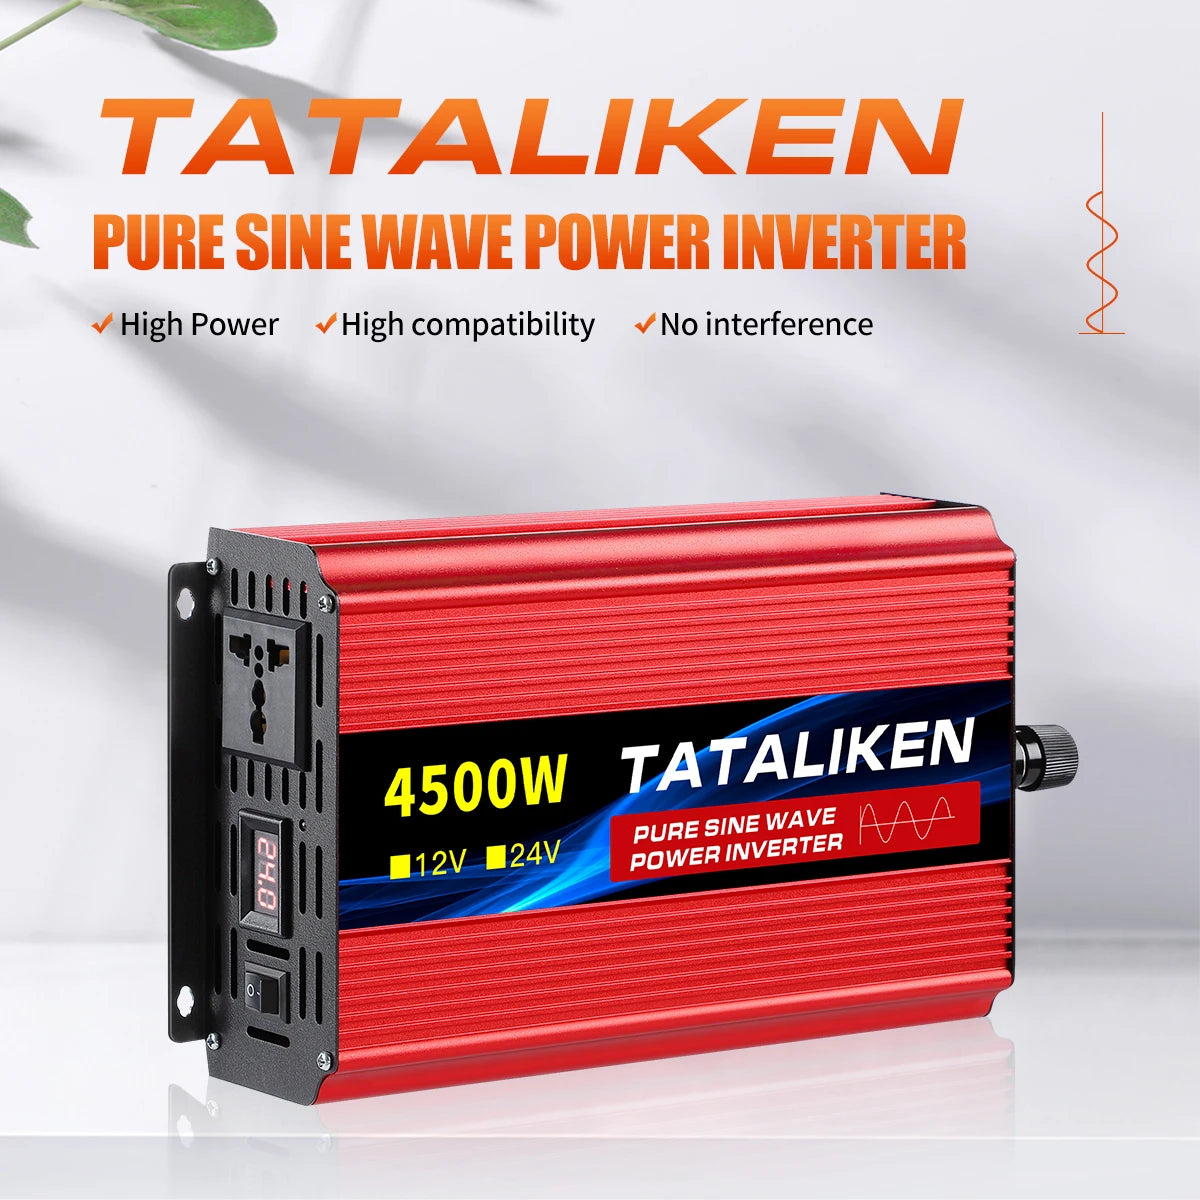 High-power inverter producing pure sine waves, compatible with 12V/24V DC input and outputting 220V AC power.